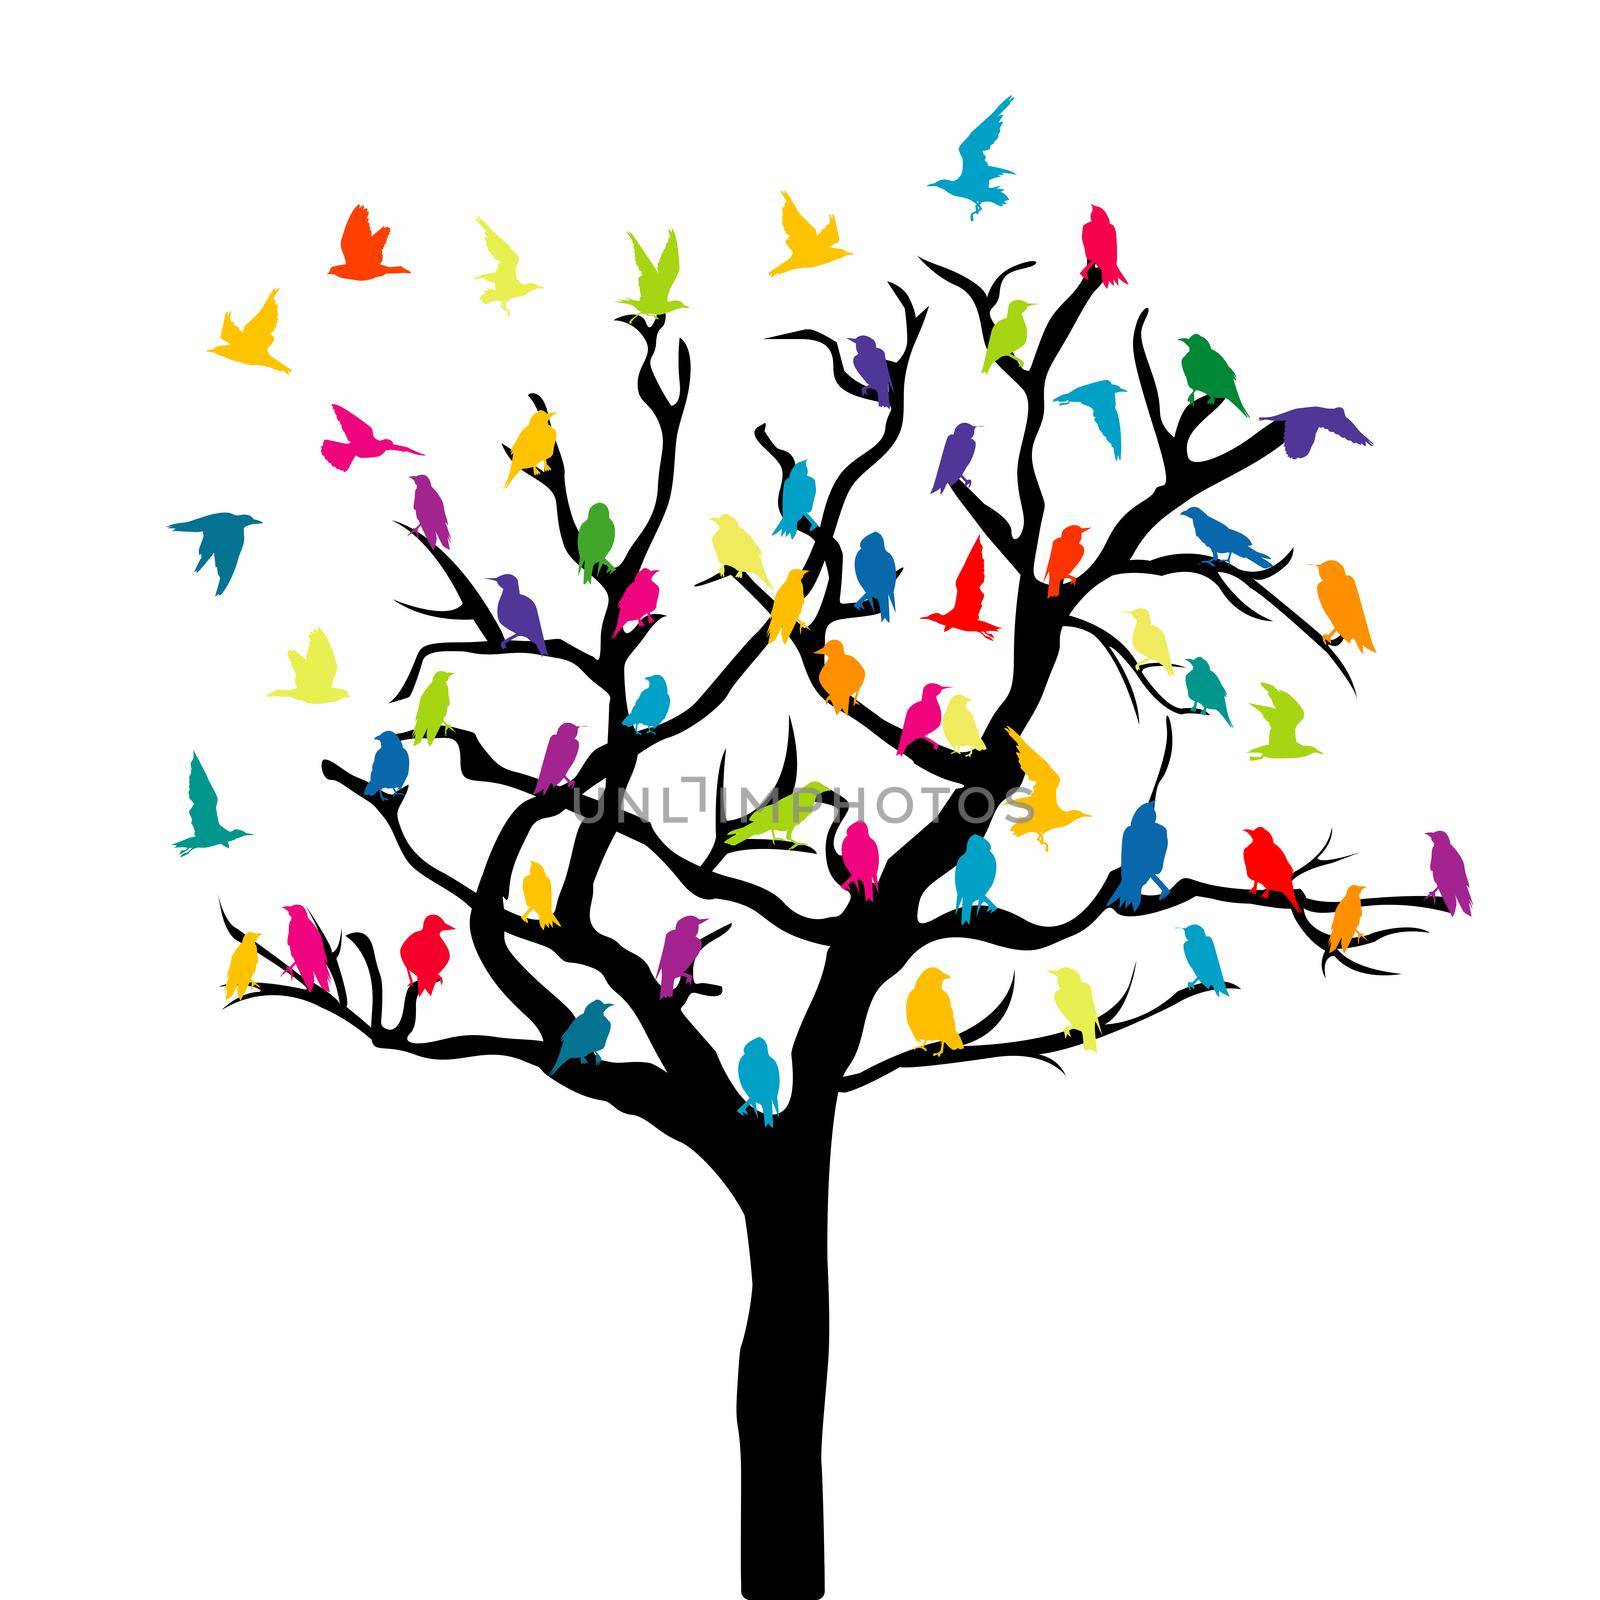 Tree with colored birds on white background by hibrida13